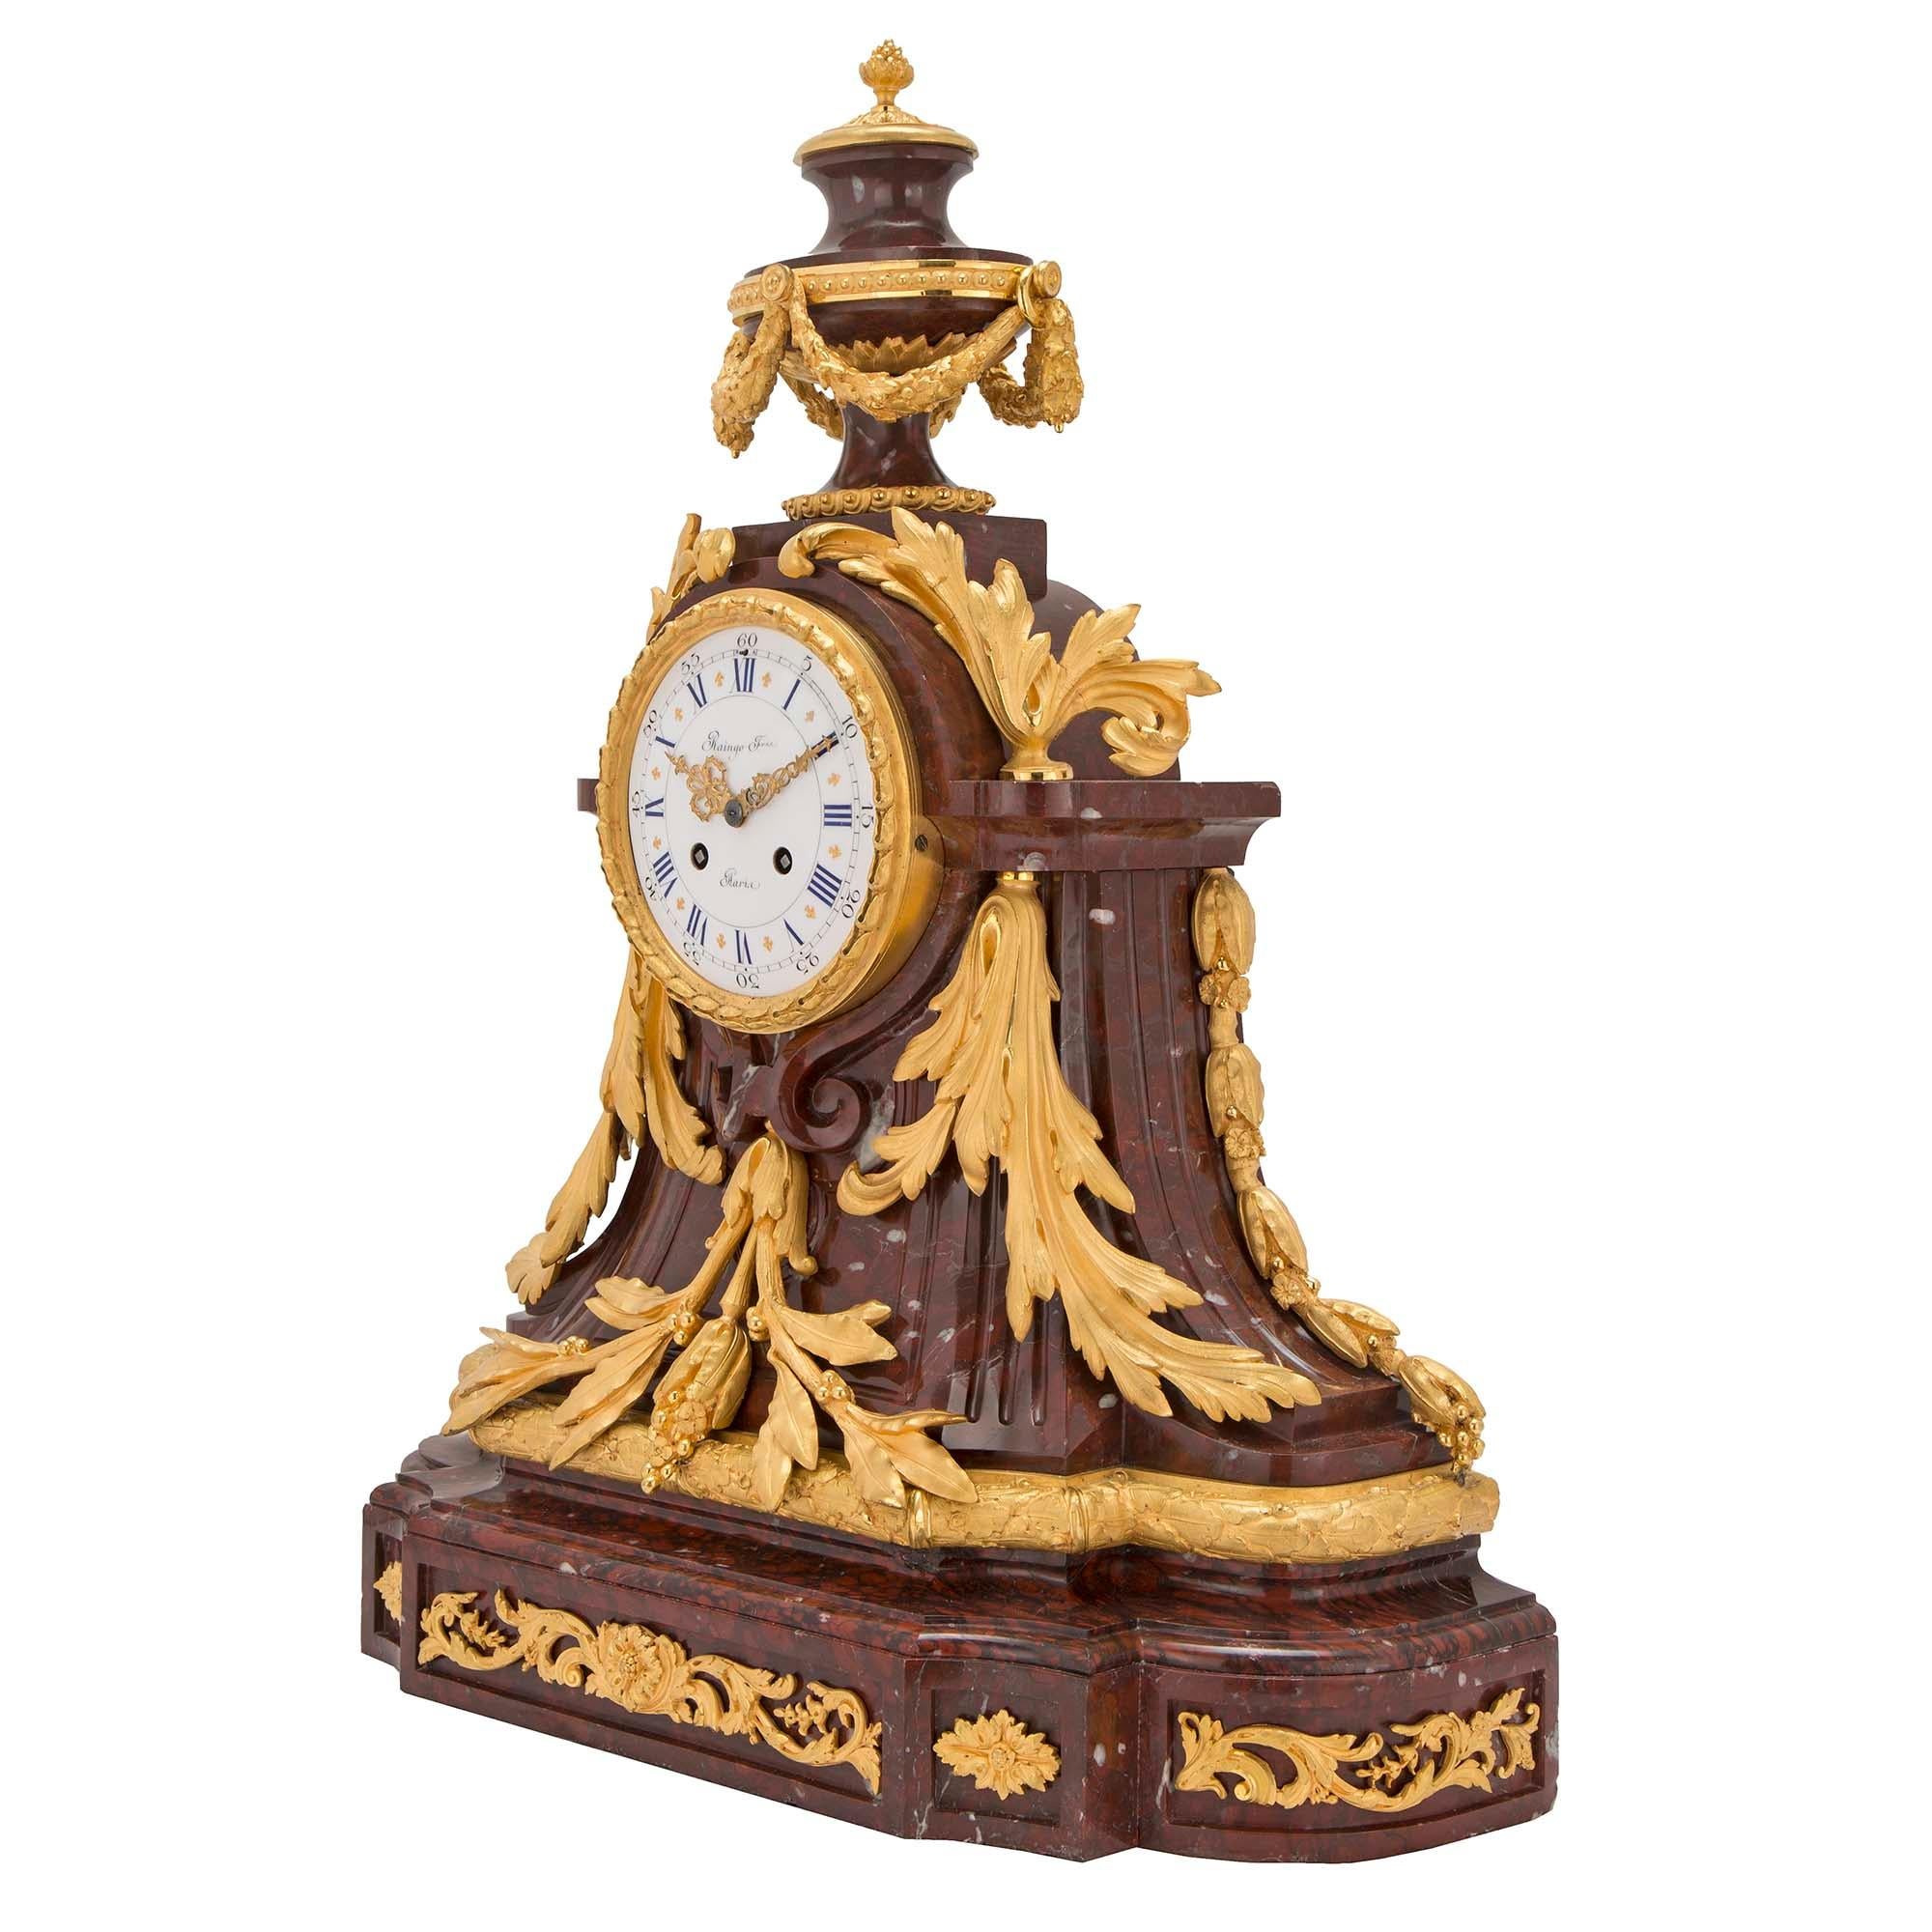 A magnificent French 19th century Louis XVI st. Rouge Griotte marble and ormolu clock by Raingo Frères, Paris. At the base are stunning ormolu mounts of rosettes and scrolled foliate, at the front and sides. The fluted marble body has a thick laurel